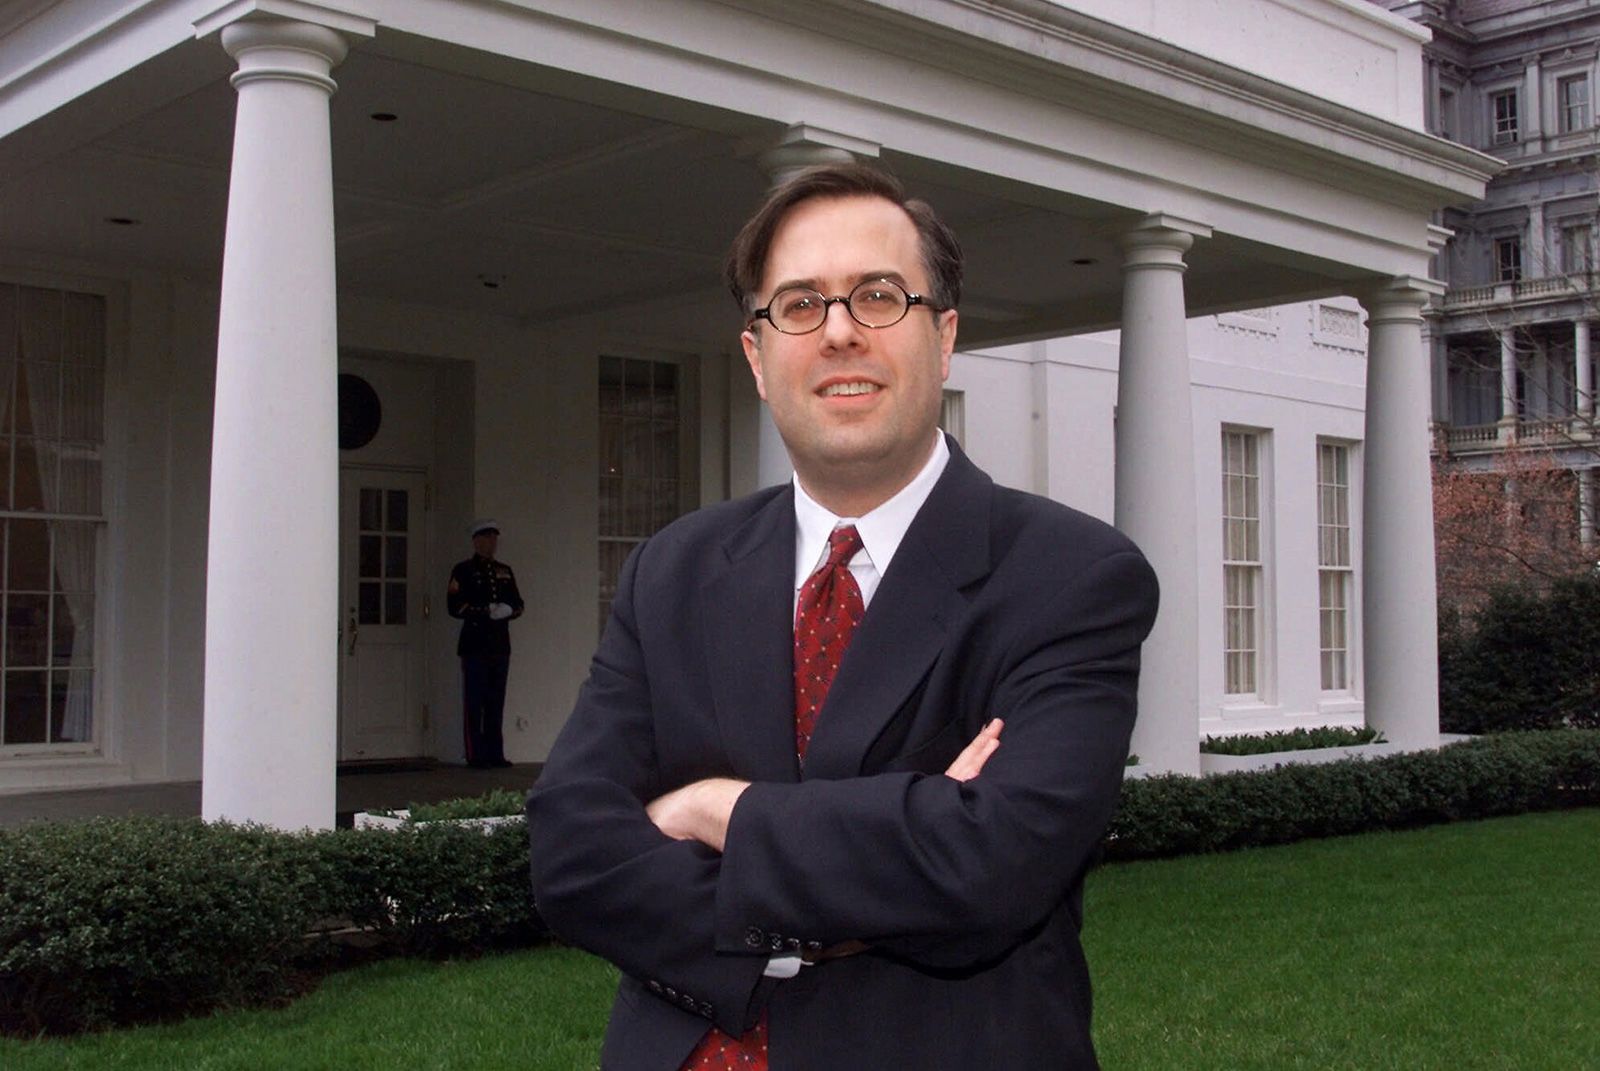 Who Is Michael Gerson's Wife? Presidential Speechwriter Dies At 58